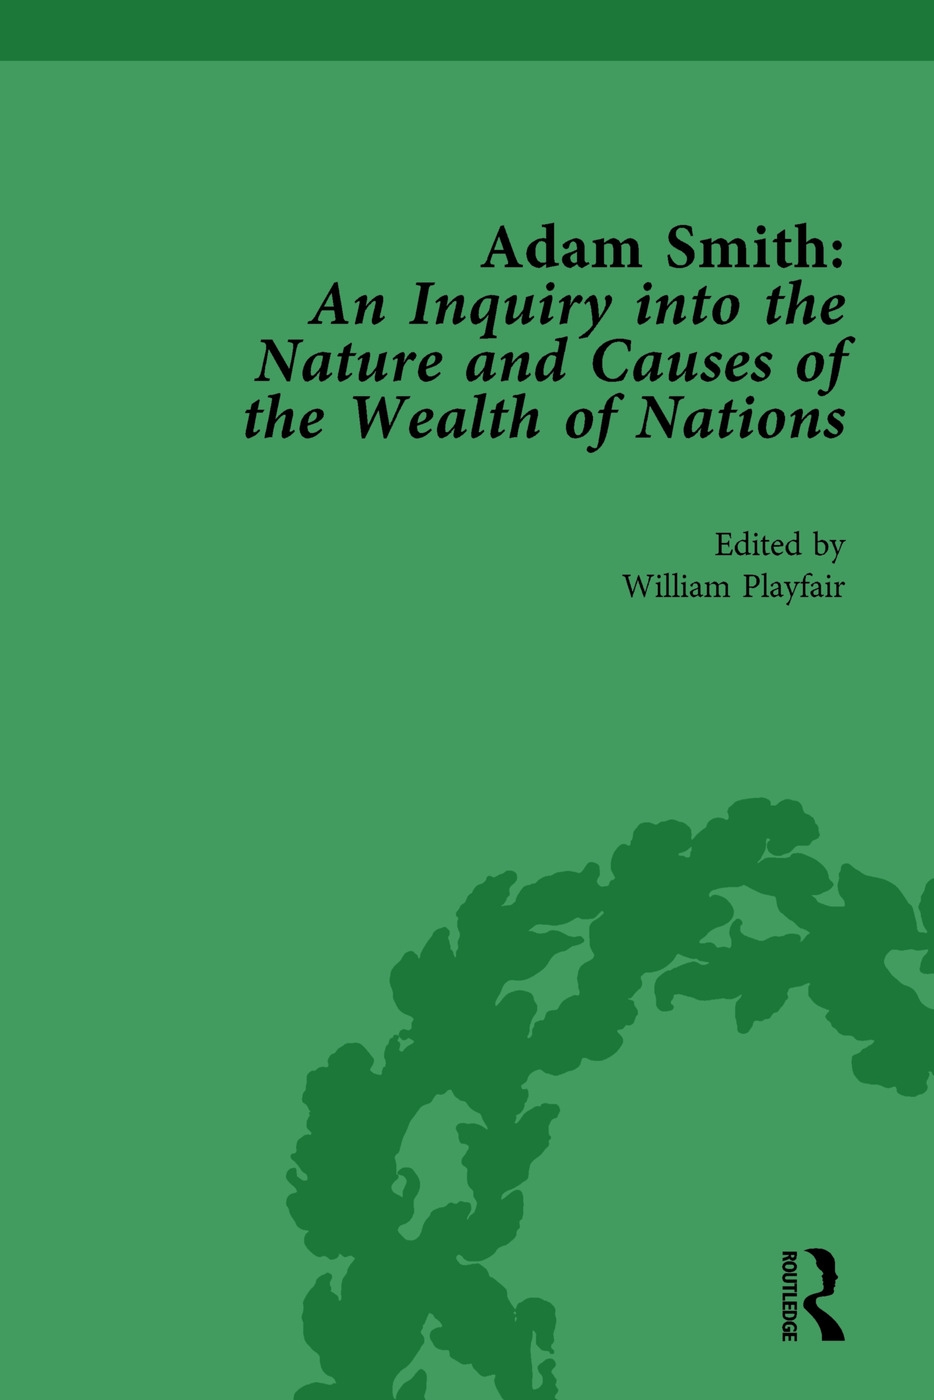 Adam Smith: An Inquiry Into the Nature and Causes of the Wealth of Nations, Volume I: Edited by William Playfair